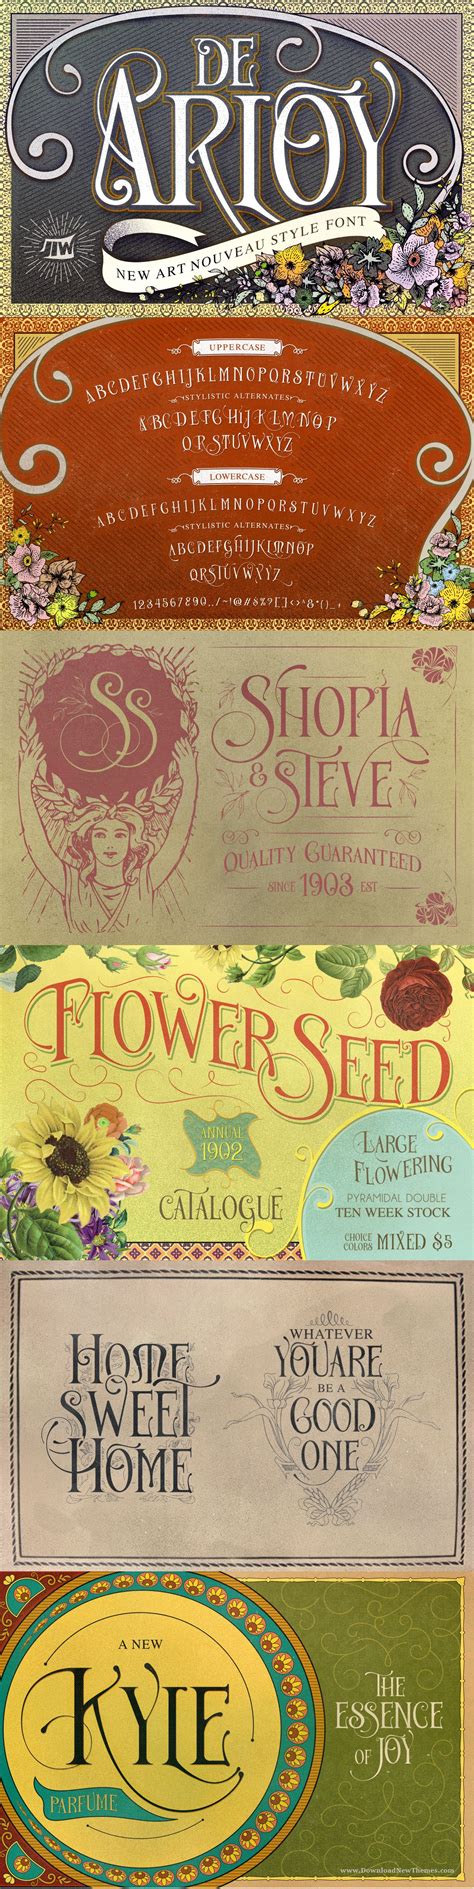 De Arloy Typeface Was Inspired By Art Nouveau Style From 1890 1910